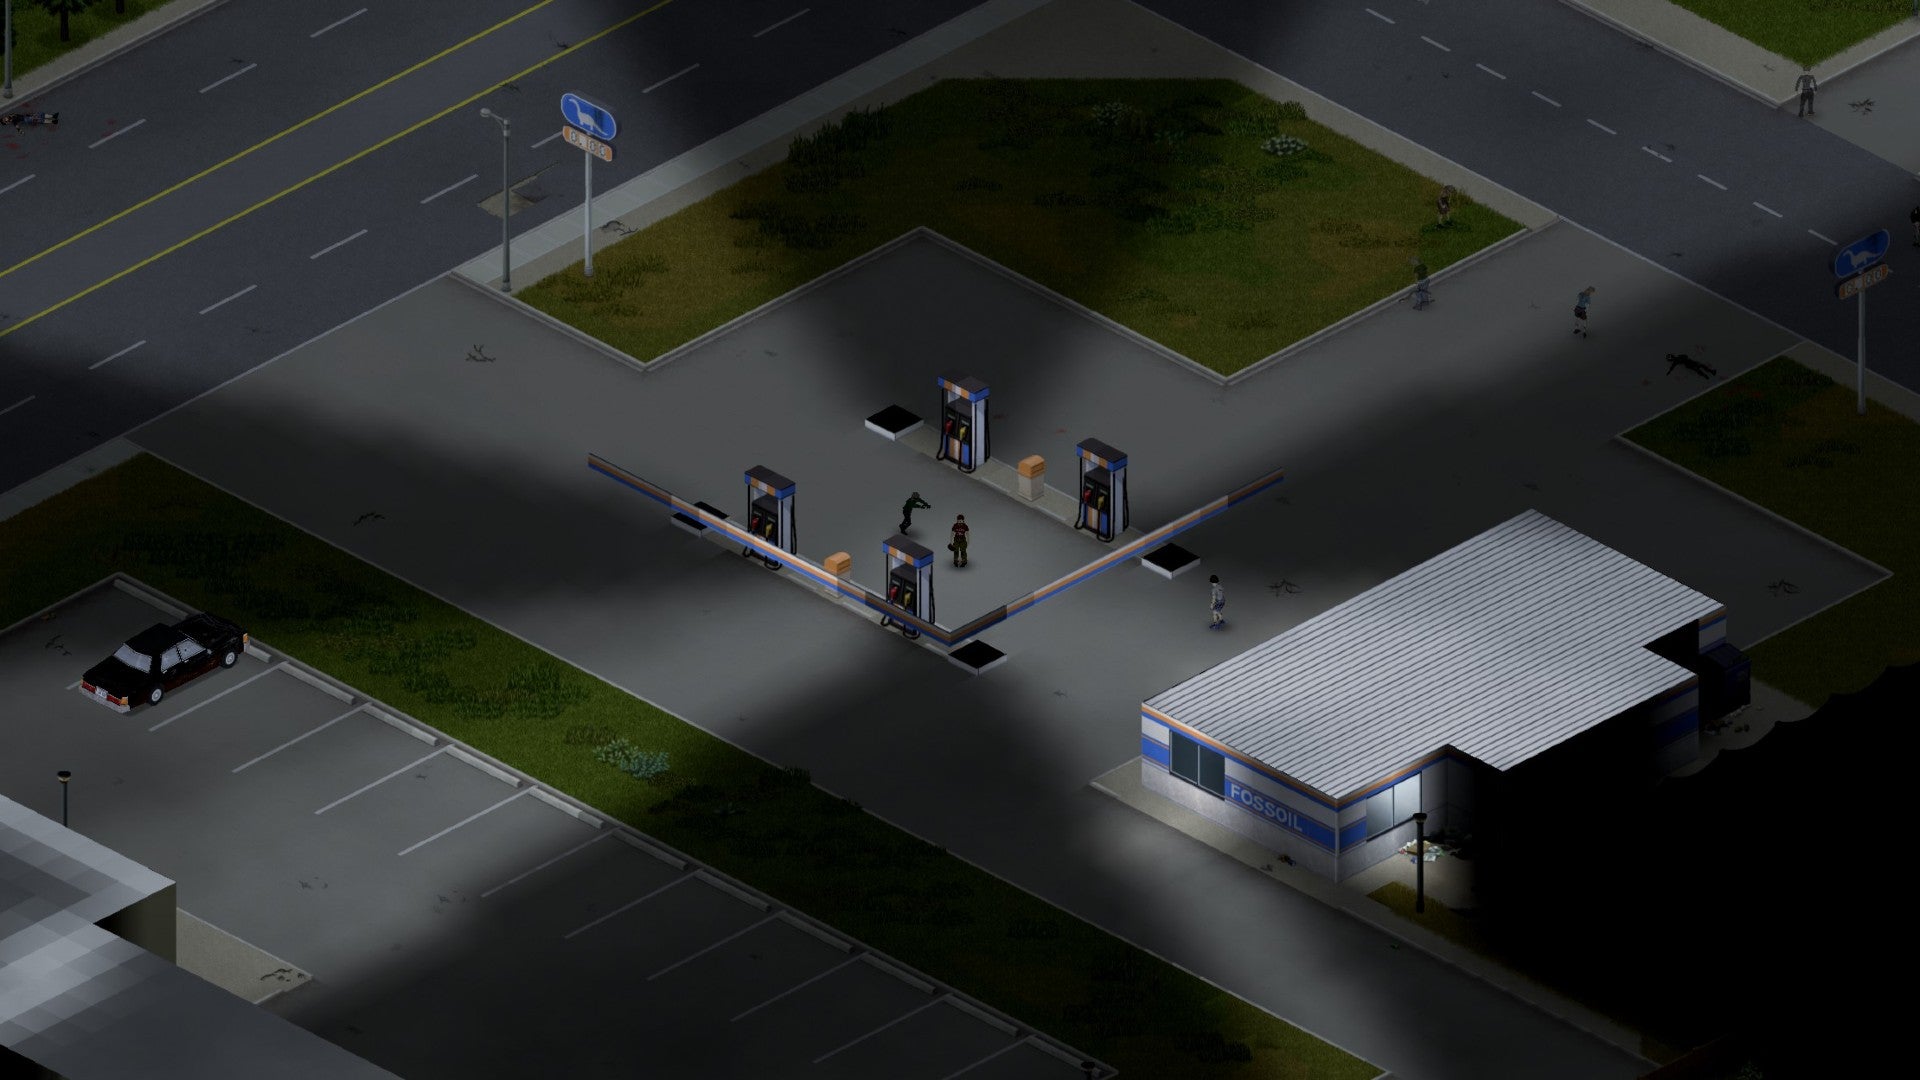 Project Zomboid player standing near a gas station with lots of zombies approaching